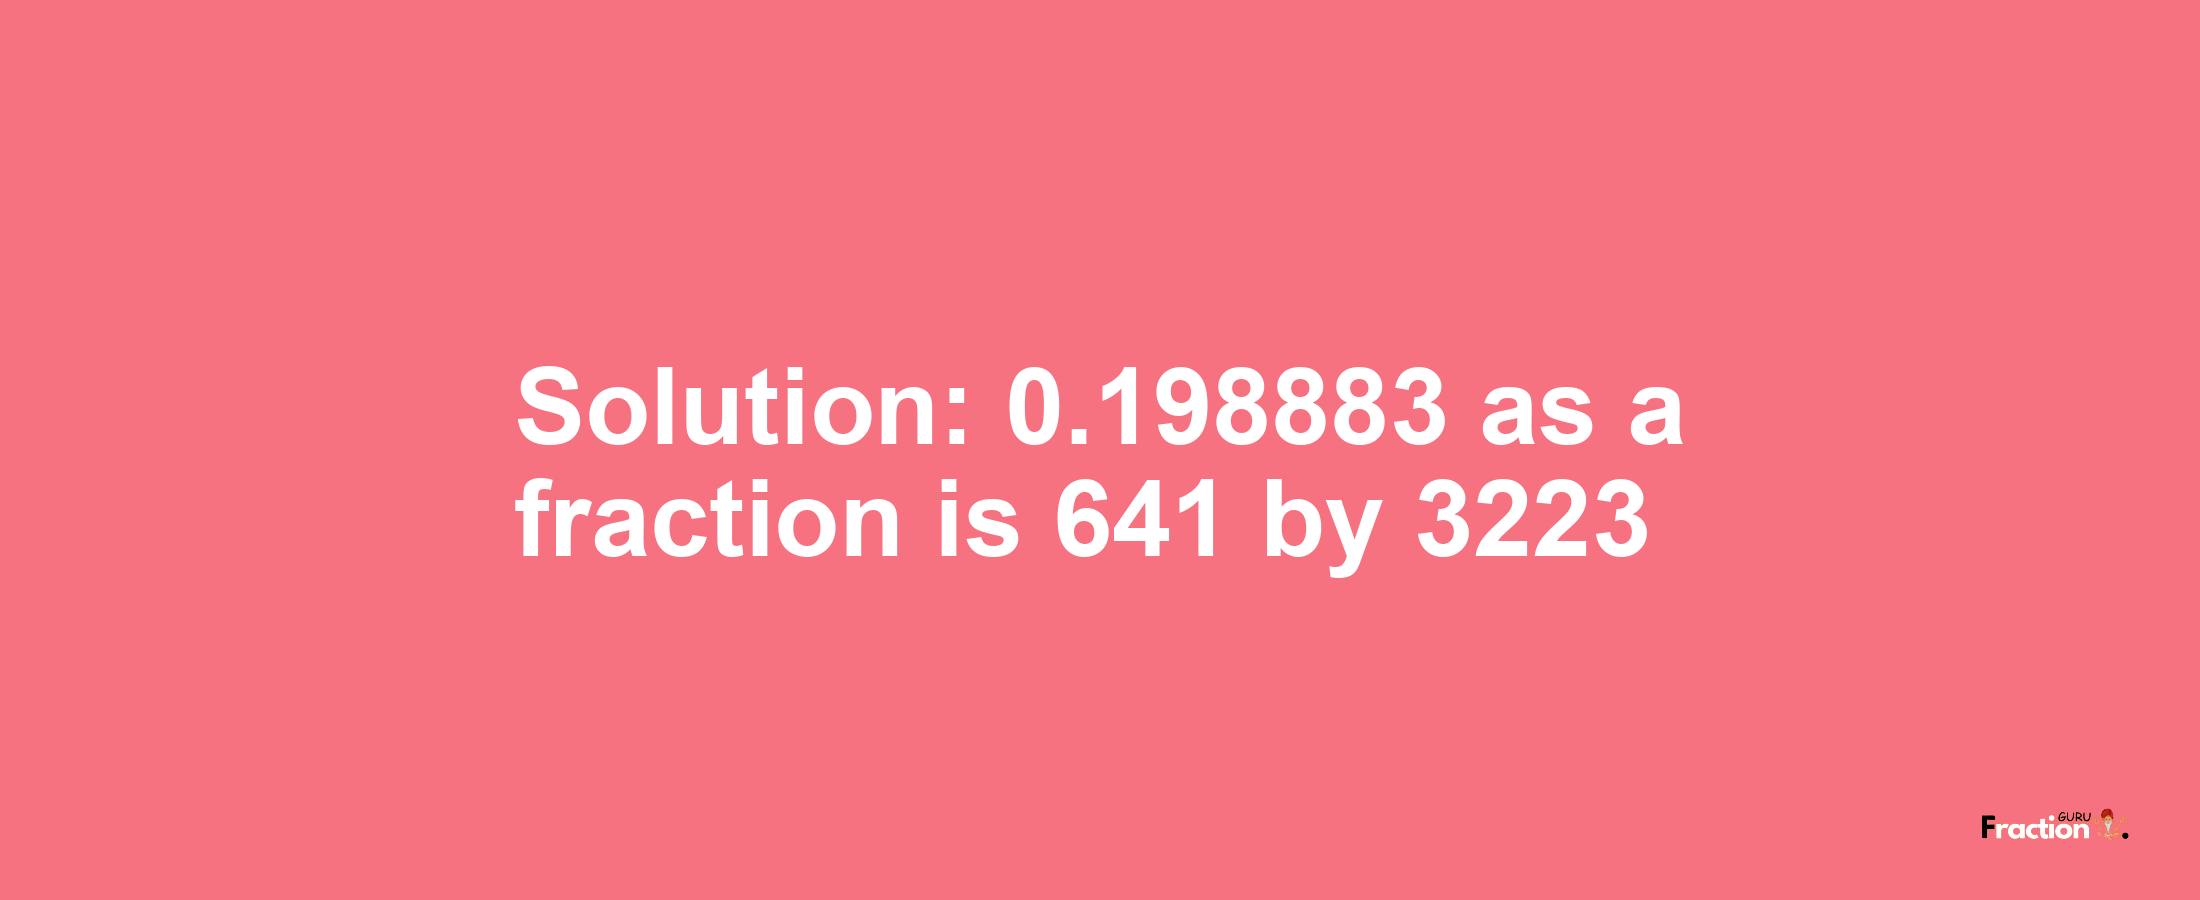 Solution:0.198883 as a fraction is 641/3223